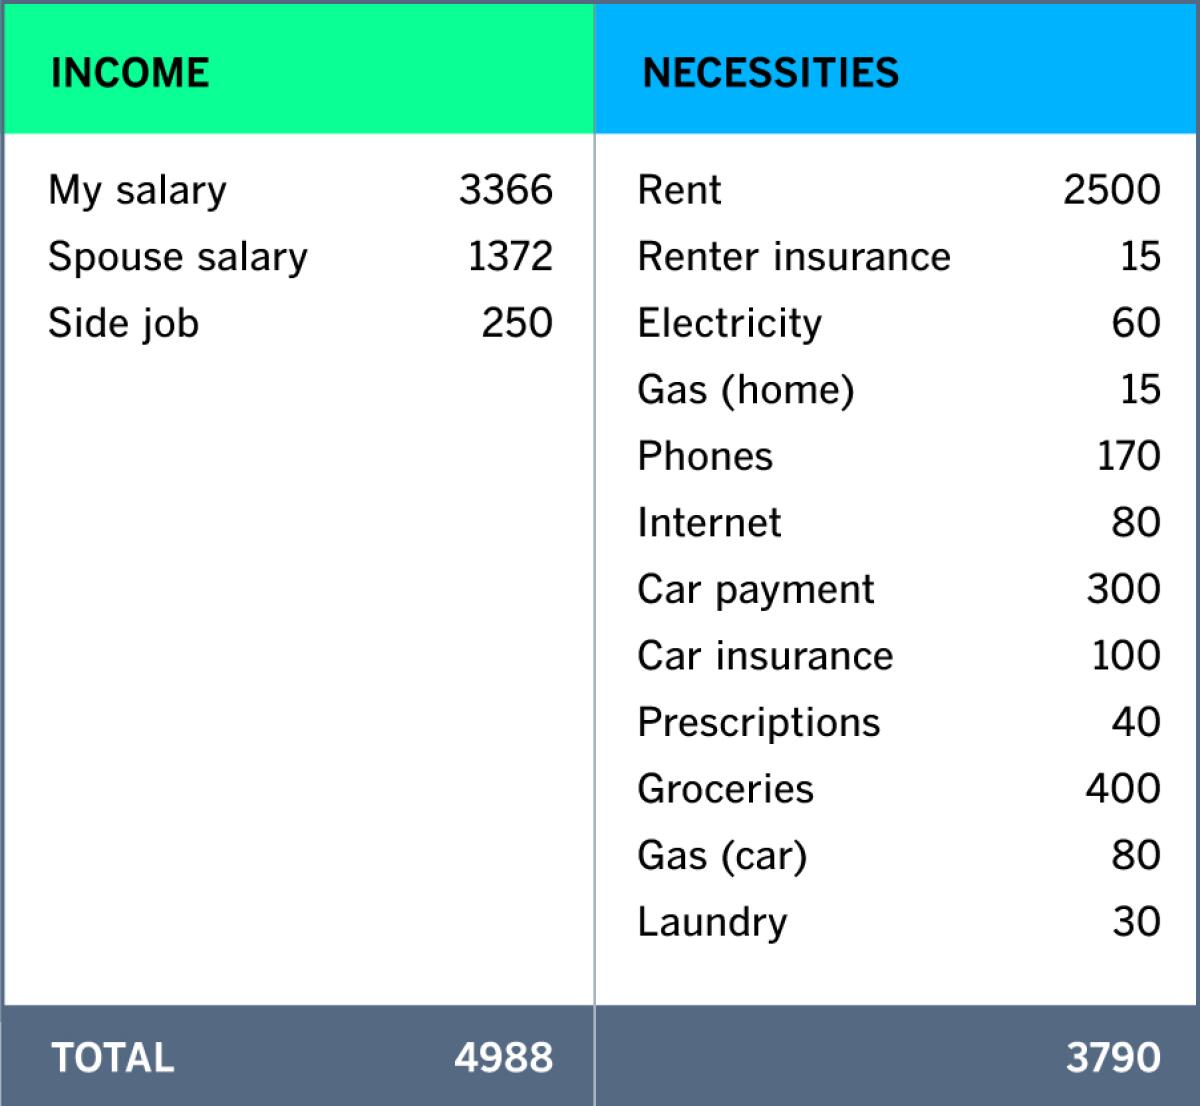 Detail of Monthly Budget: Necessities